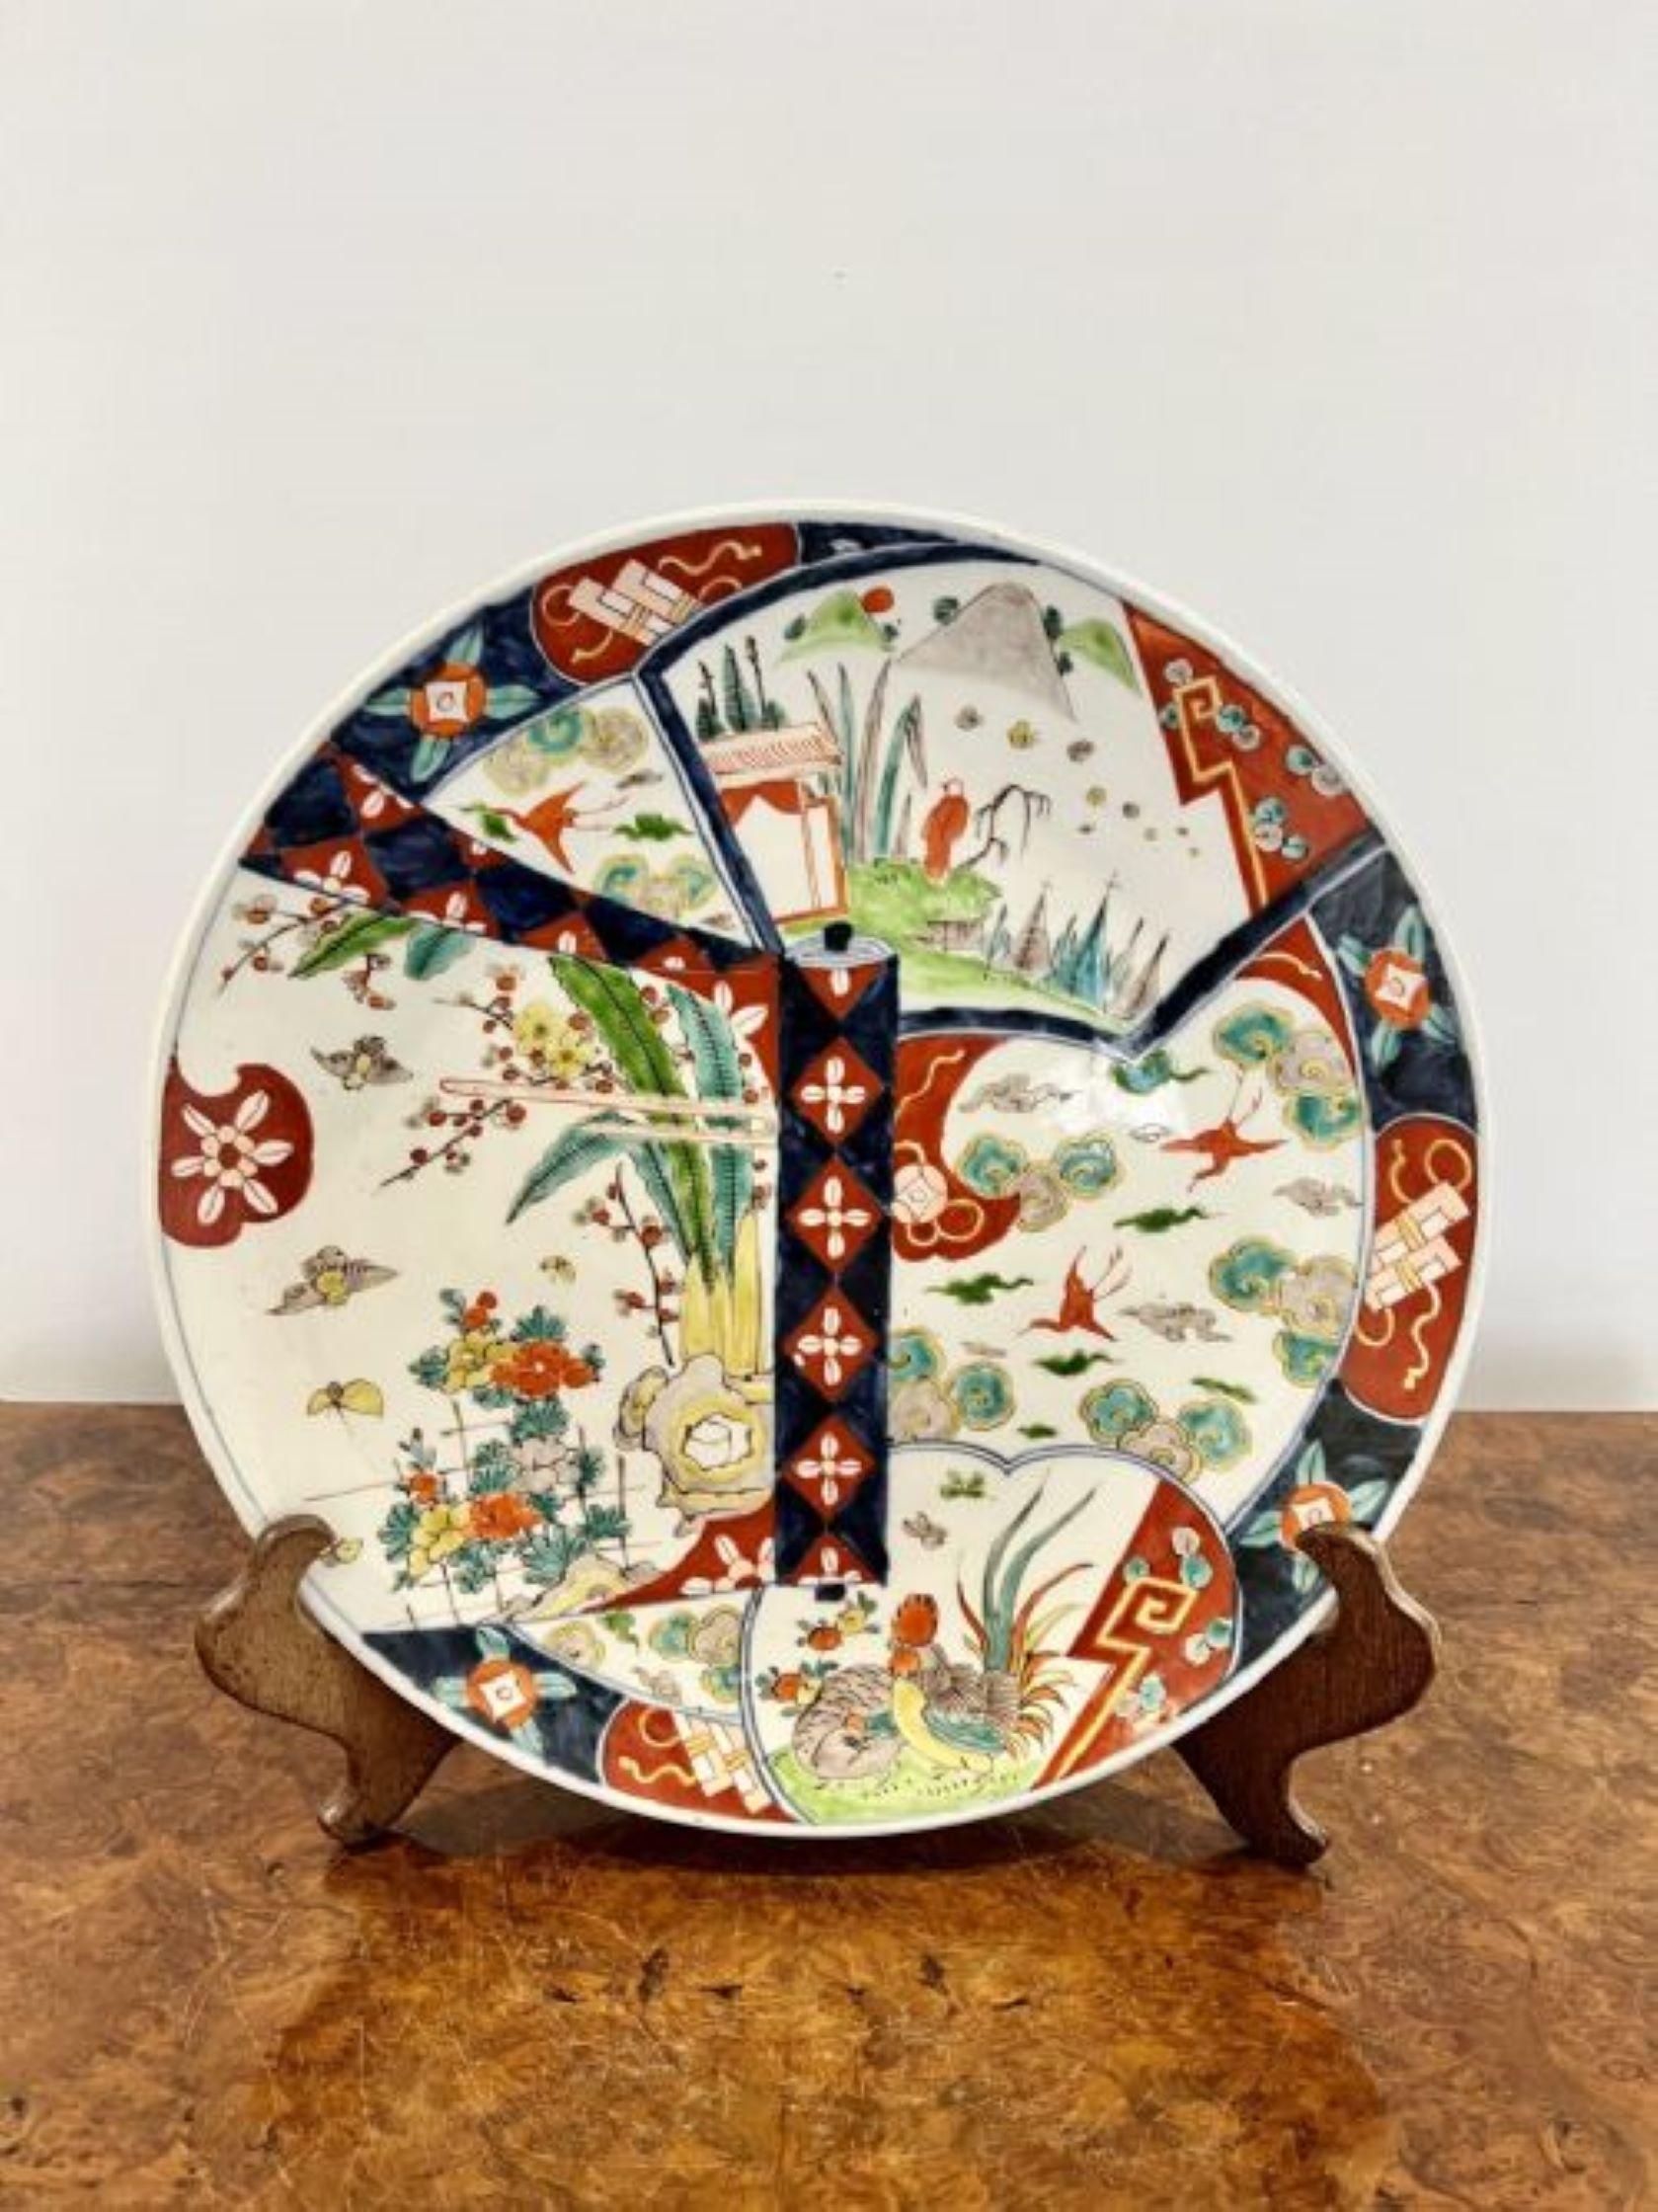 Quality antique  Japanese Imari charger having wonderful hand painted decoration with flowers, leaves, trees and birds in Red, Blue, Green, White and Gold colours.